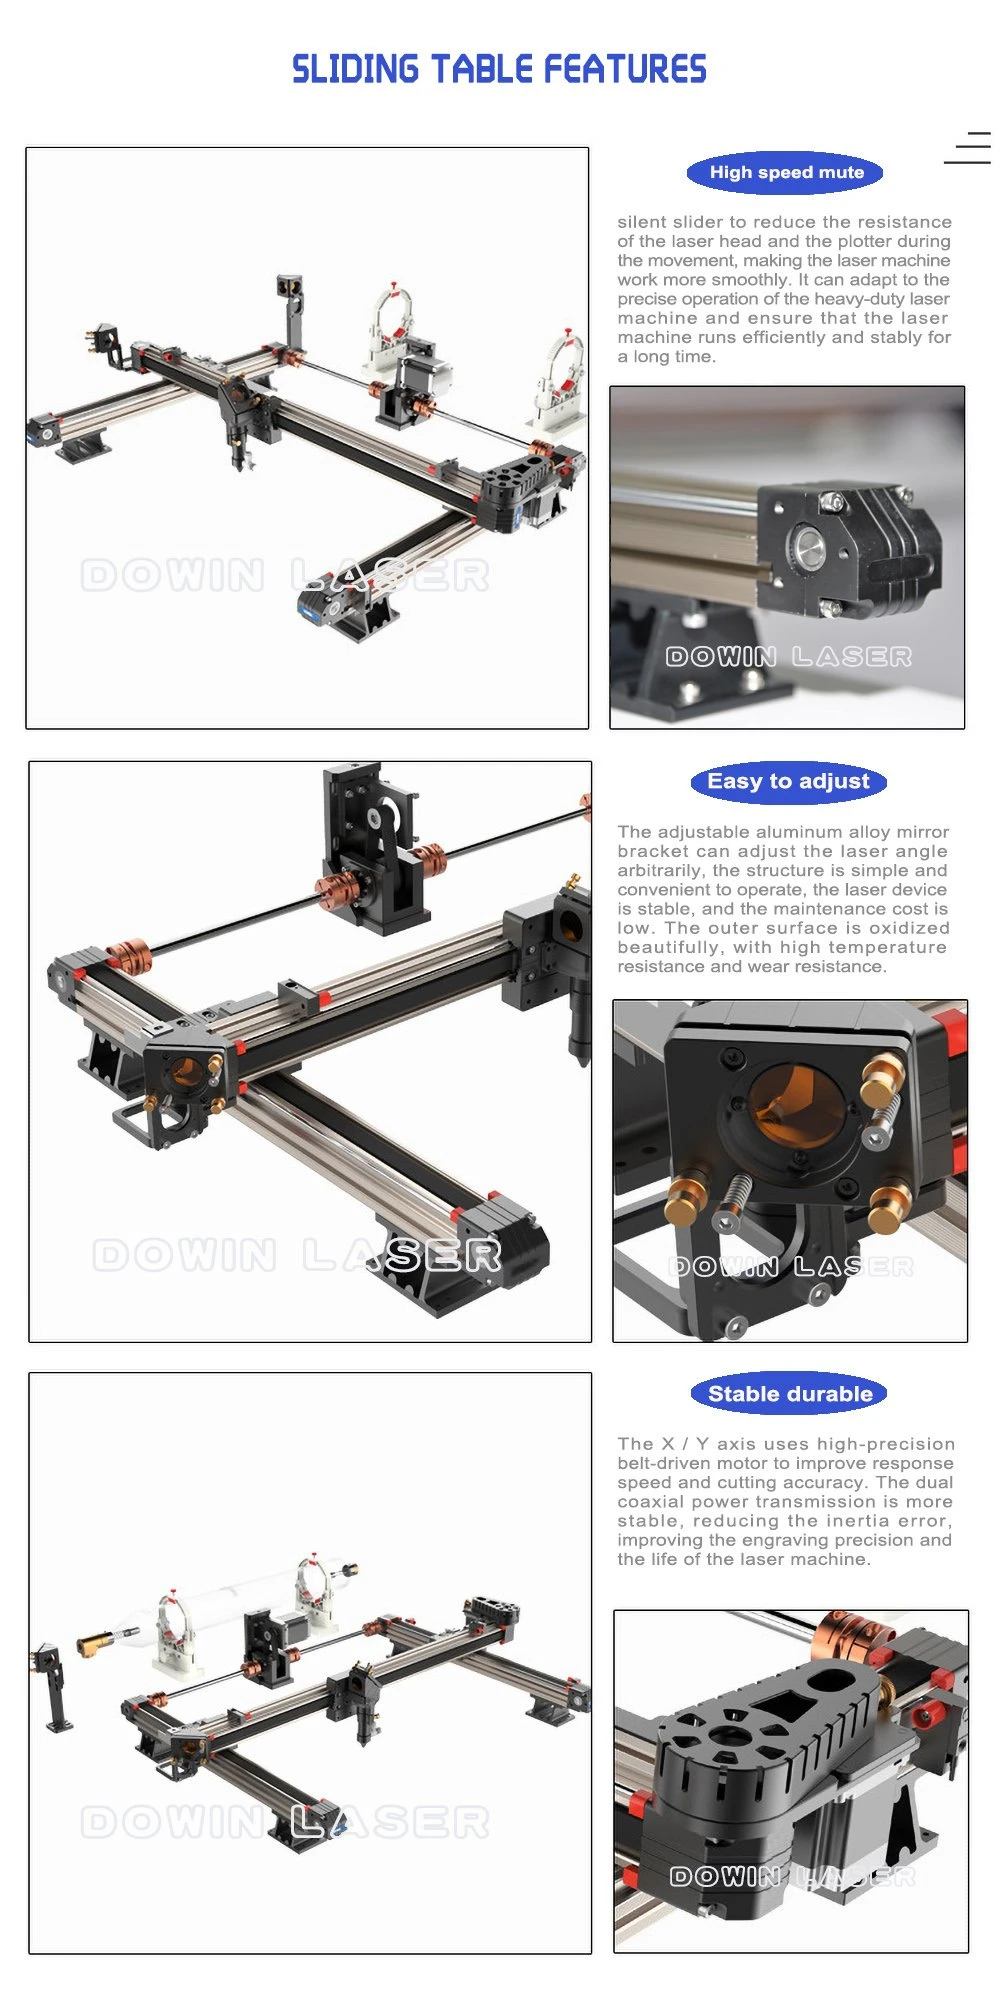 Hot Sale CO2 1390 Laser Cutter CNC Wood Laser Cutting Machine for Non Metal Engraving